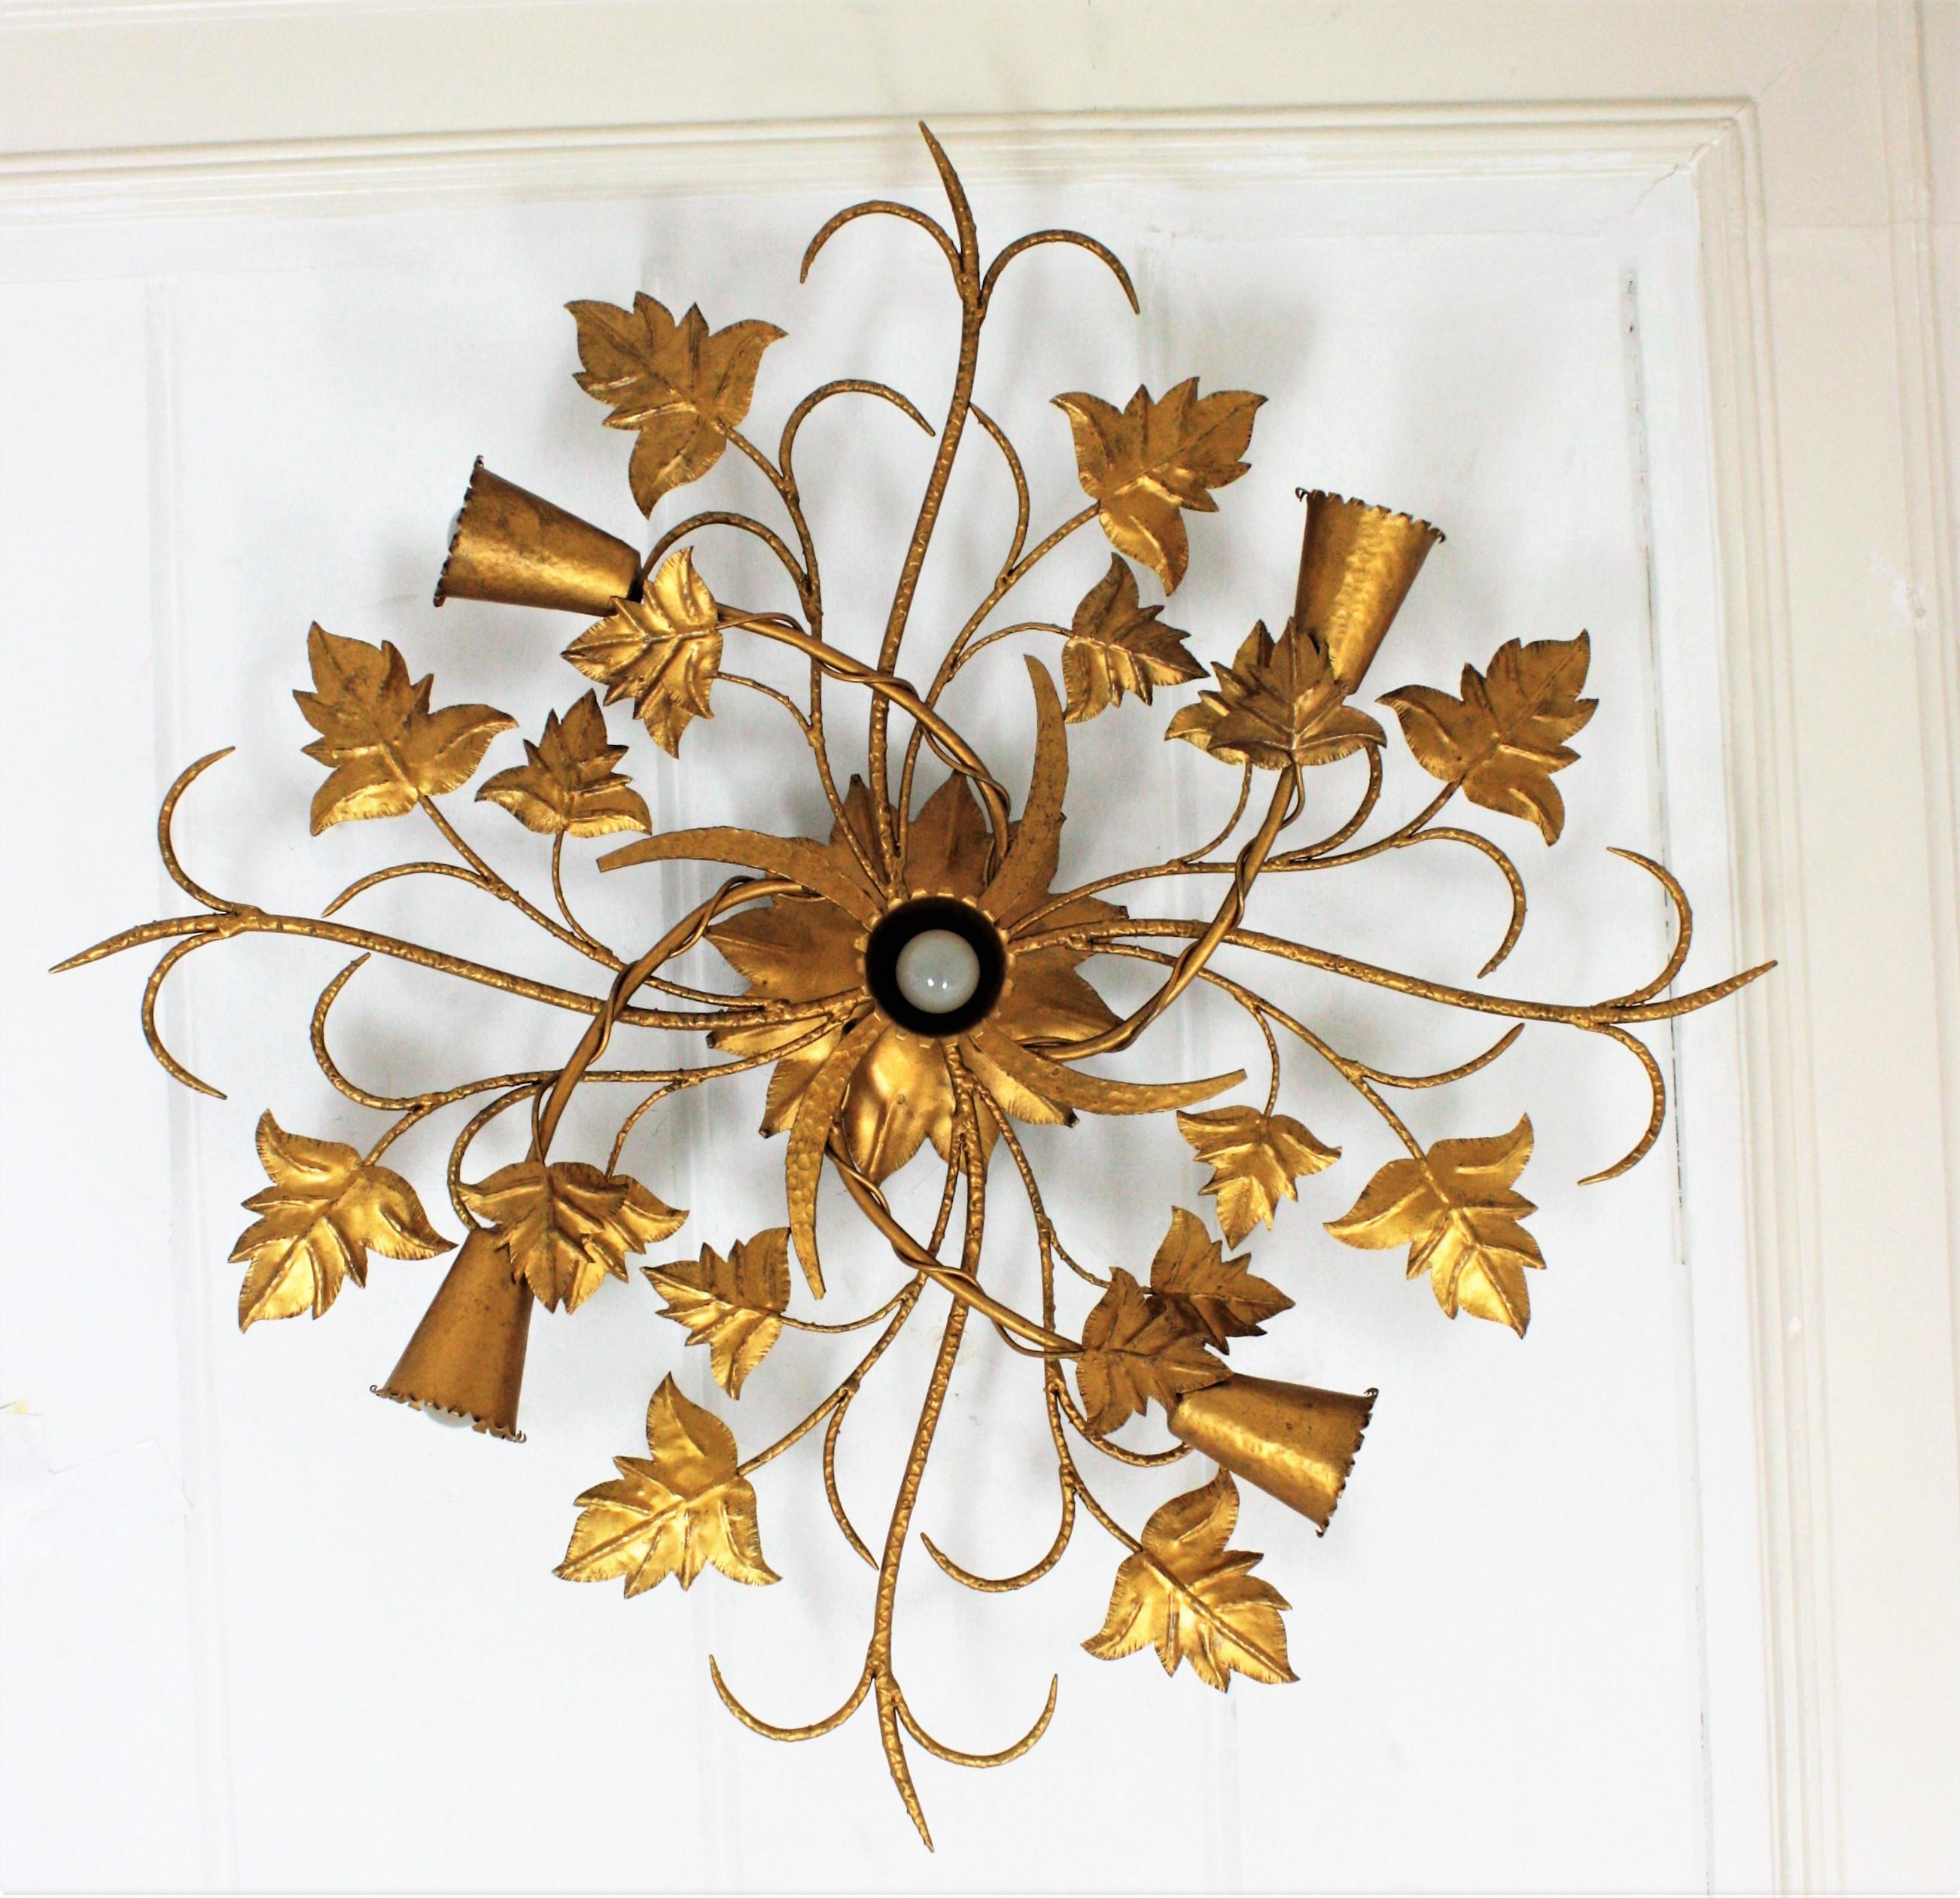 Massive Spanish Art Nouveau style gilt iron floral ceiling light fixture or chandelier, Spain, 1930s-1940s.
This magnificent flush mount lamp features a foliate design structure with four branches ending with conical bulb holders and a central